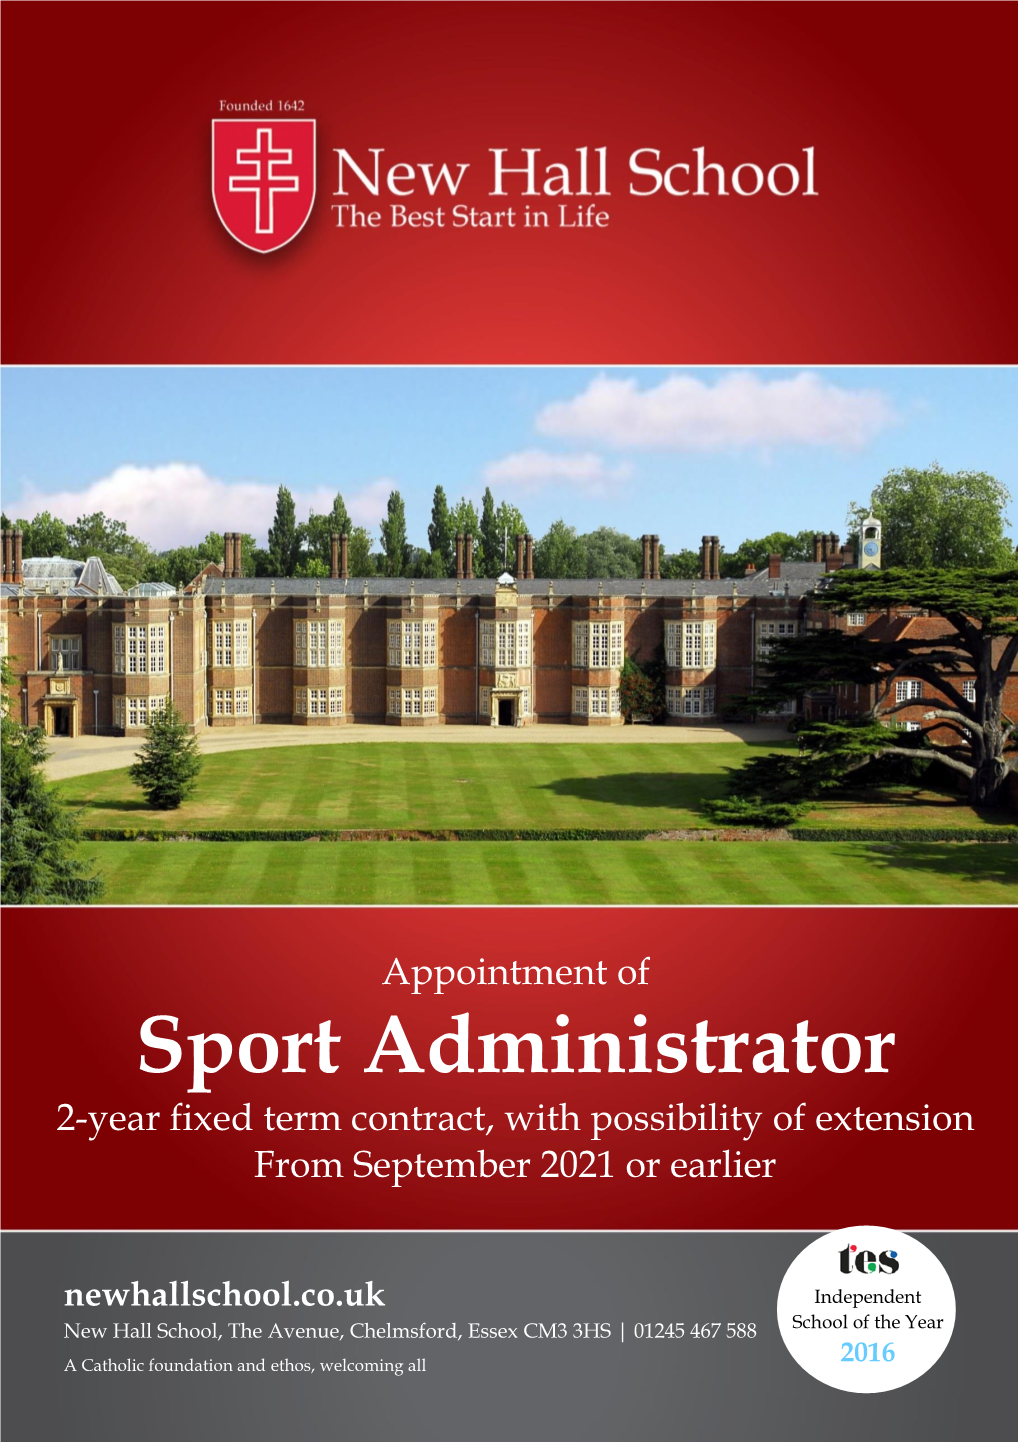 Sport Administrator 2-Year Fixed Term Contract, with Possibility of Extension from September 2021 Or Earlier